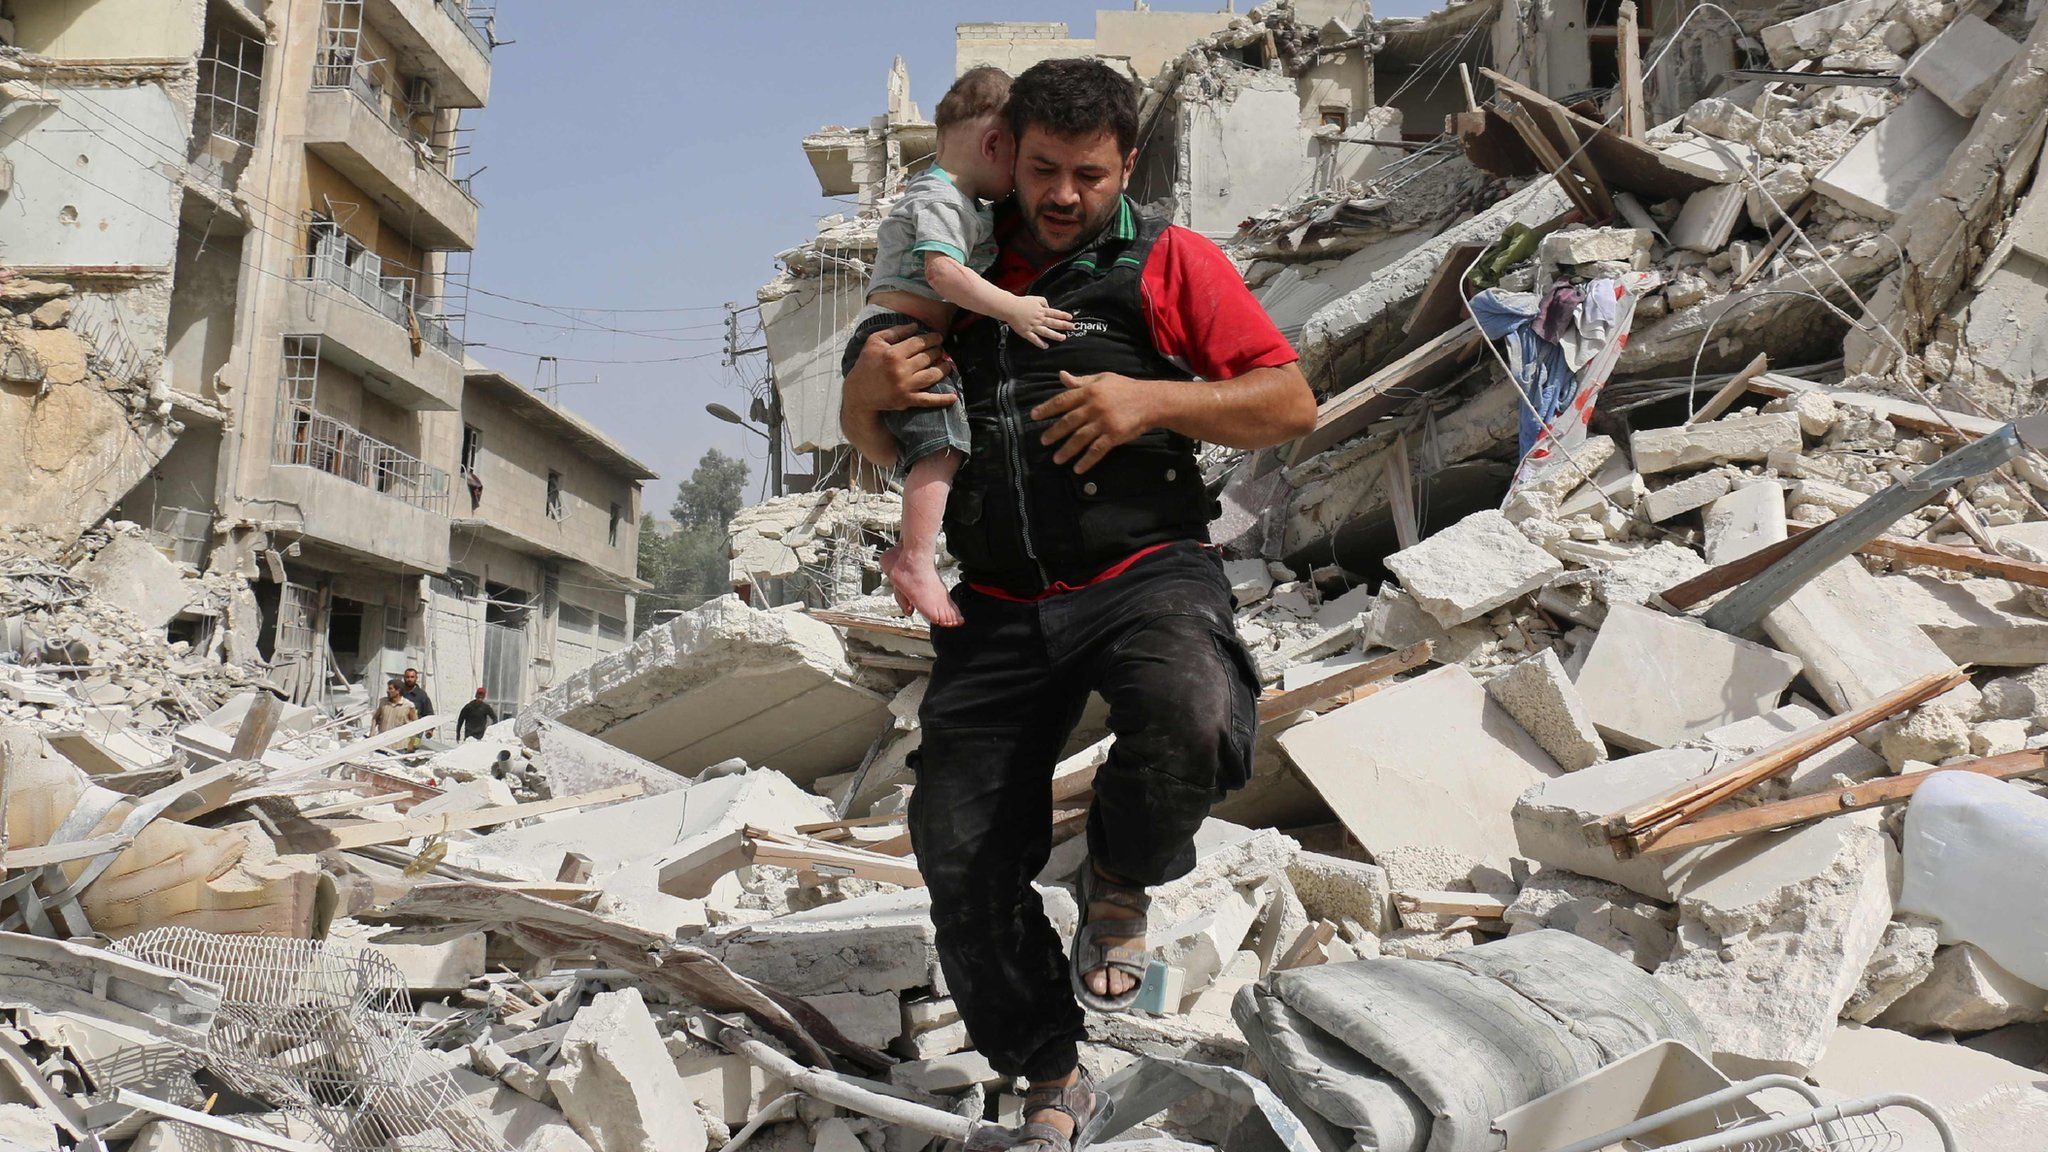 A Syrian man carries a baby after removing him from the rubble of a destroyed building following a reported air strike in the Qatarji neighbourhood of the northern city of Aleppo on September 21, 2016